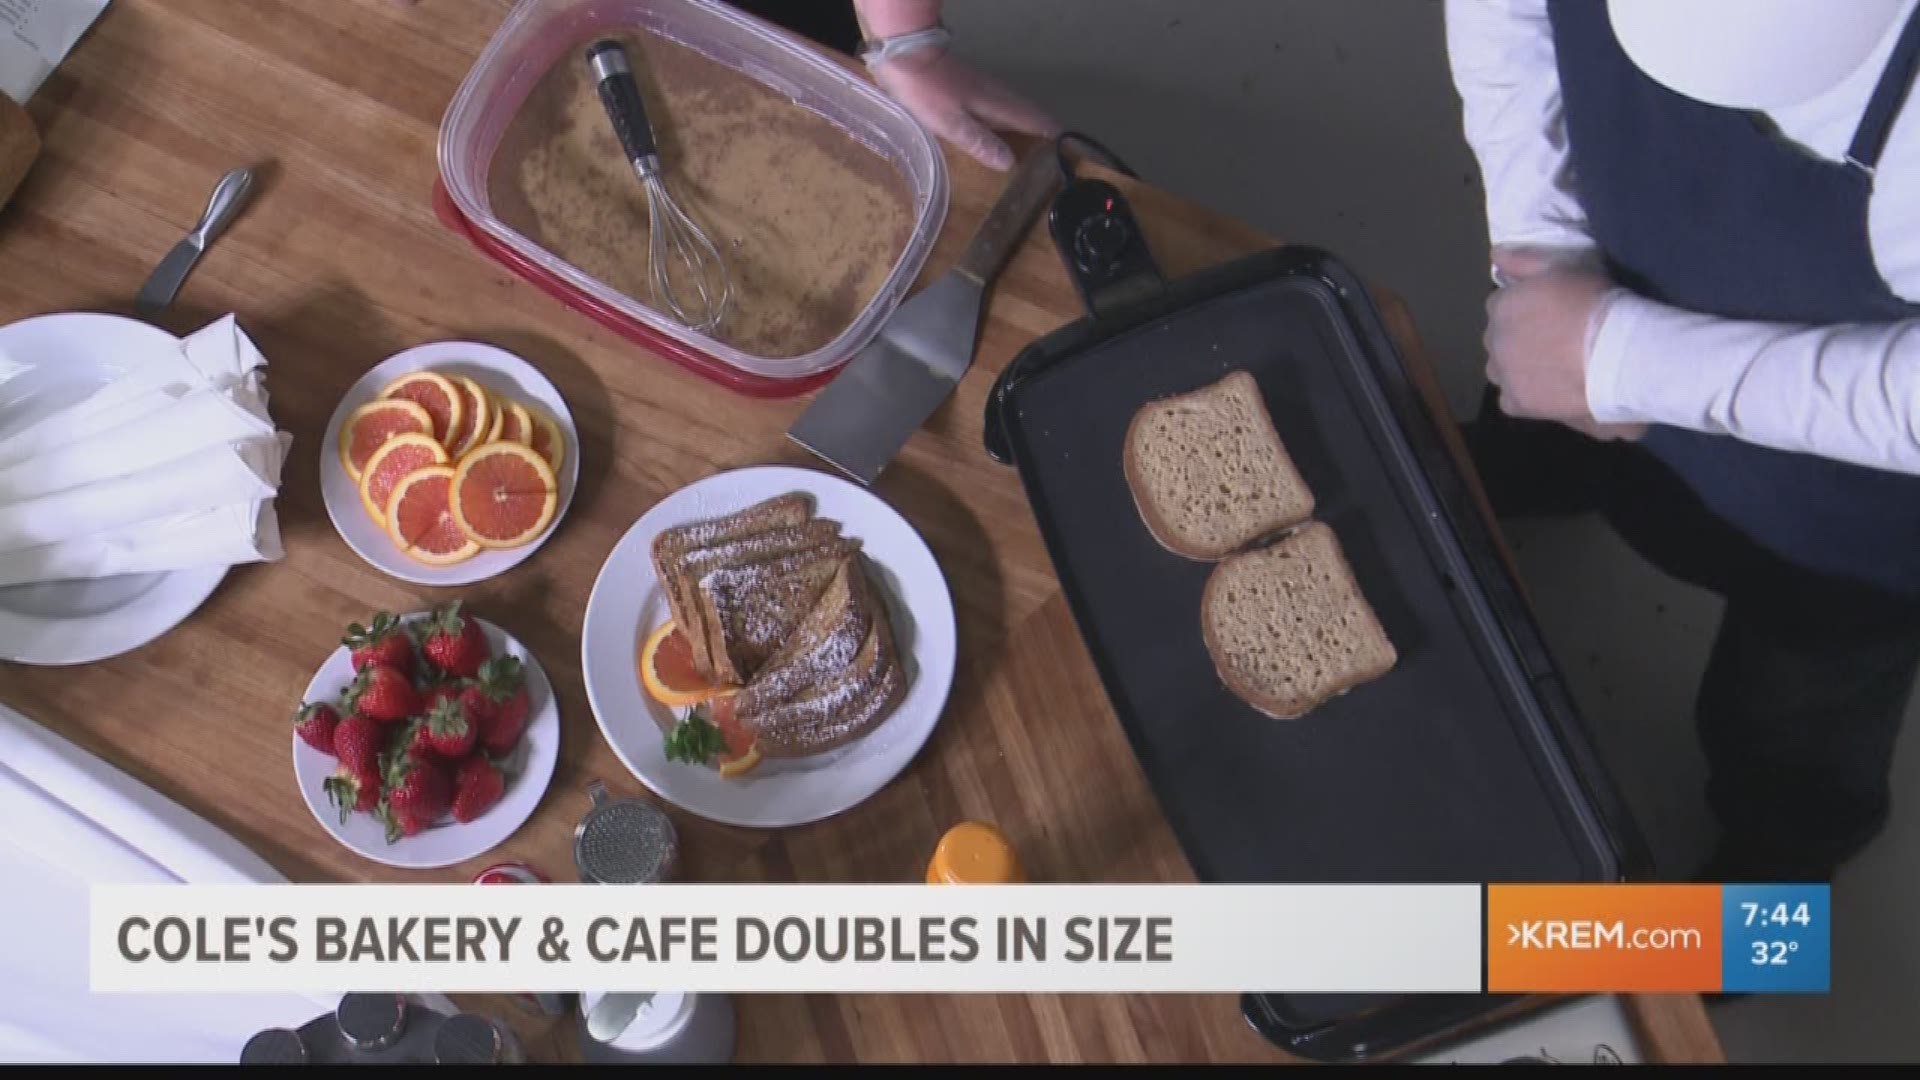 Cole's Bakery & Cafe is one of the only 100% gluten-free restaurants in the Inland Northwest. The owners recently expanded the facility and the menu to provide a better experience for their customers.